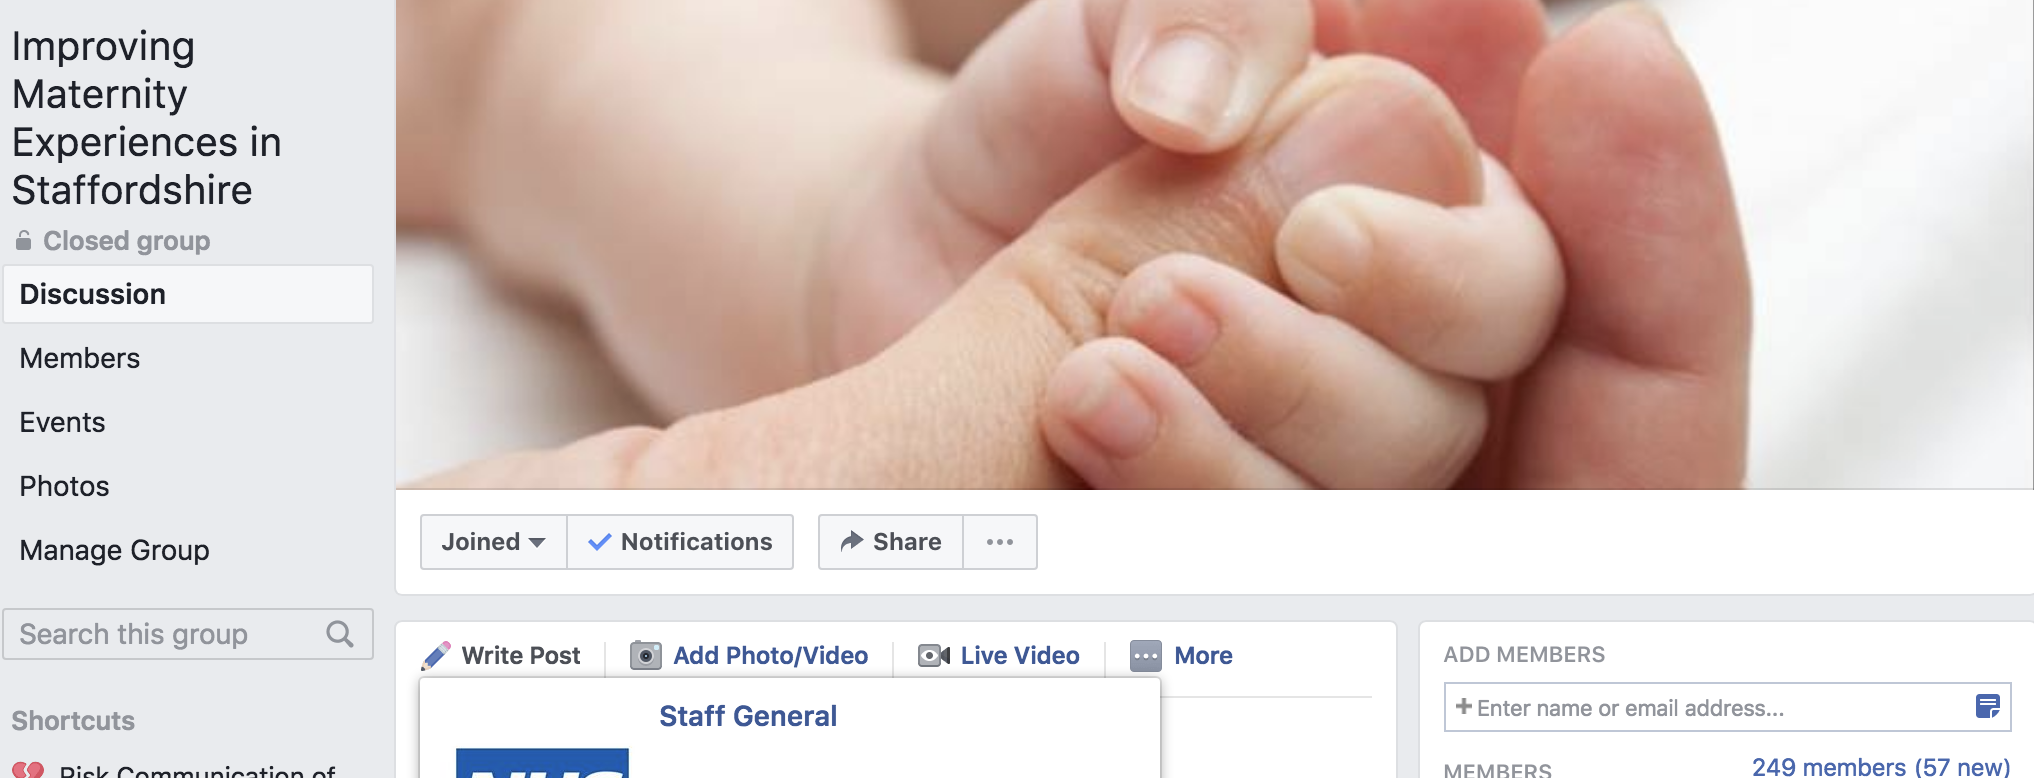 Transforming Maternity Services via Social Media featured image